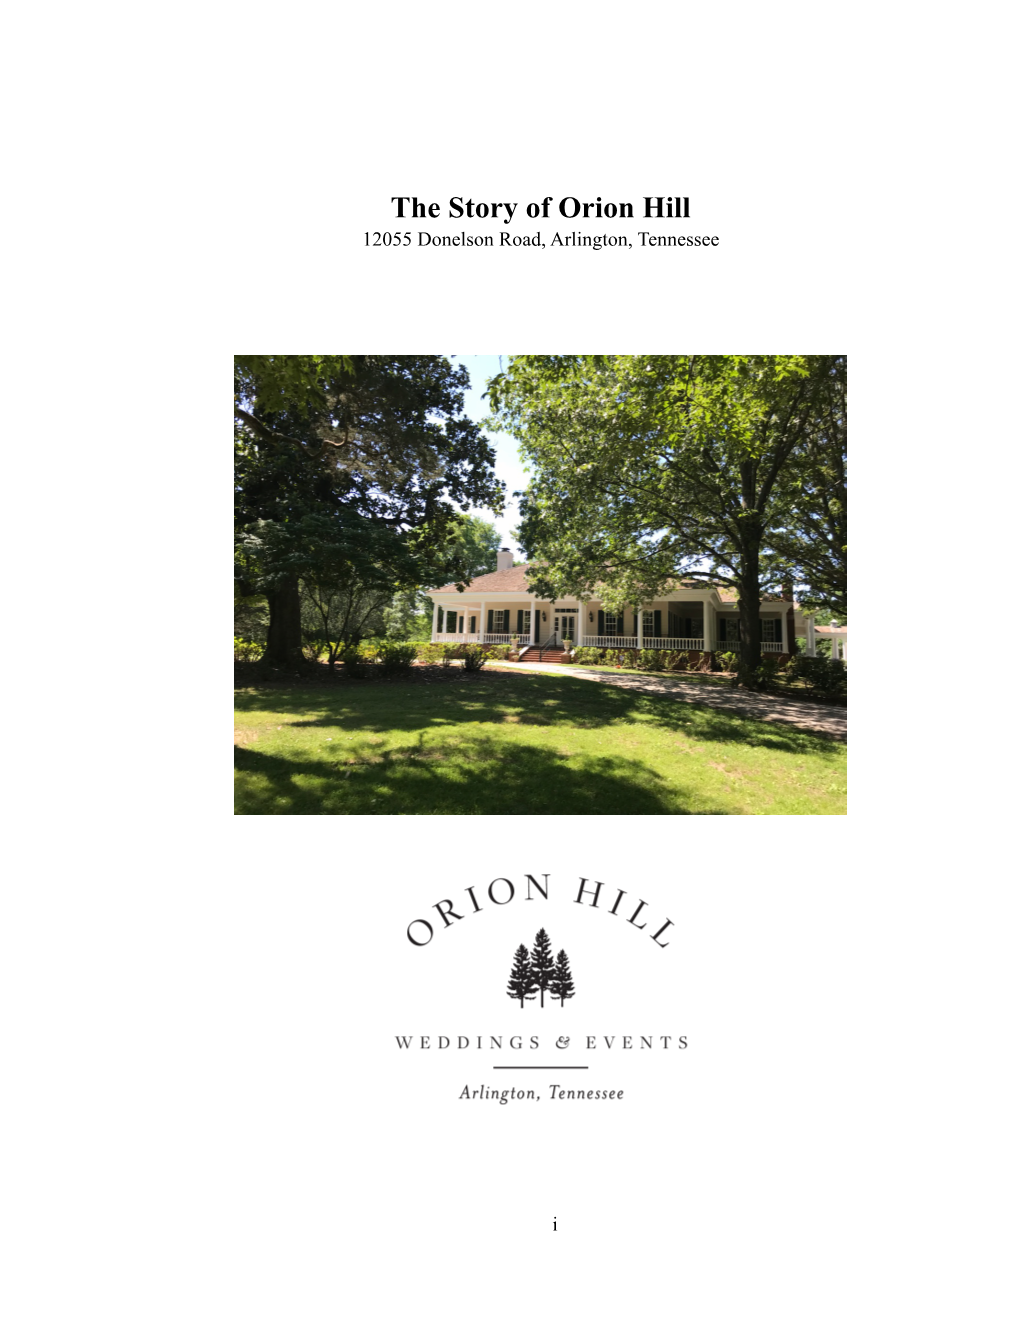 The Story of Orion Hill 12055 Donelson Road, Arlington, Tennessee